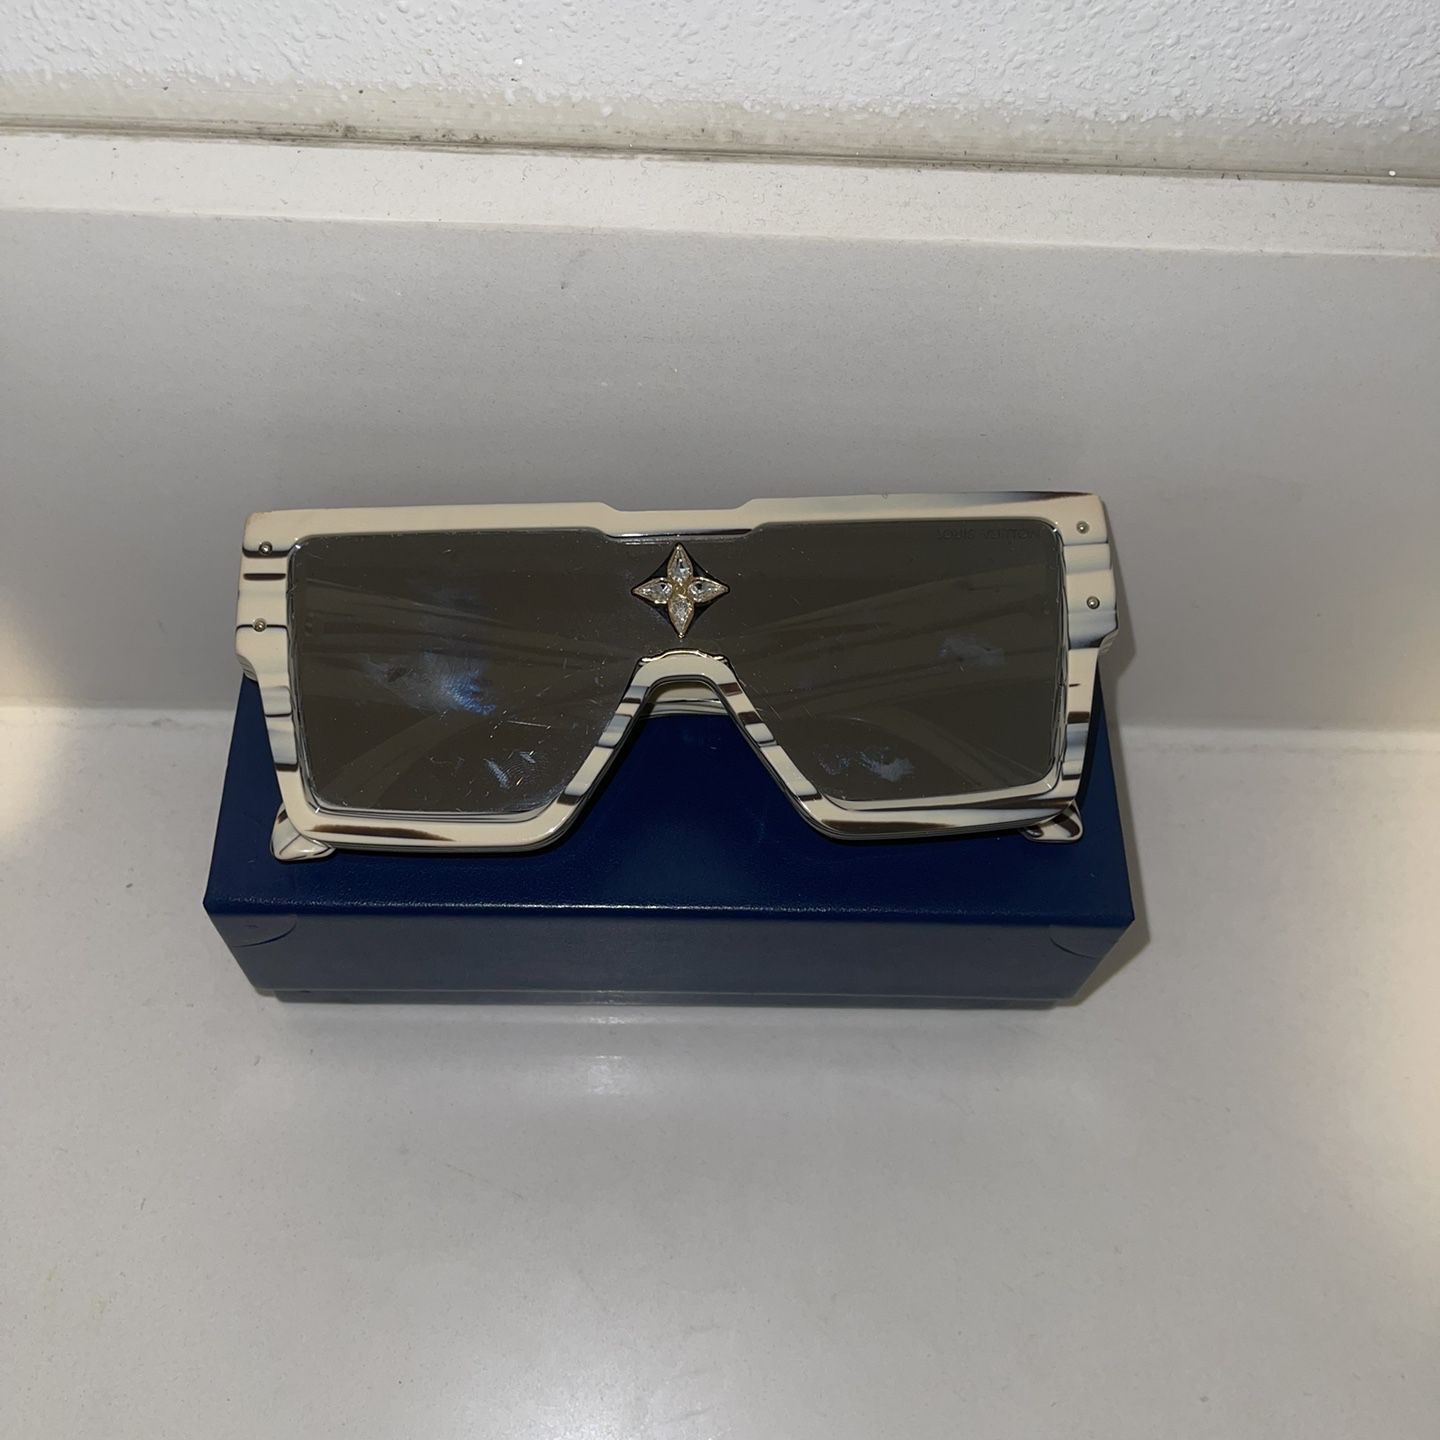 Louis Vuitton Cyclone Sunglasses Clear Rainbow Gradient Tinted for Sale in  Hempstead, TX - OfferUp